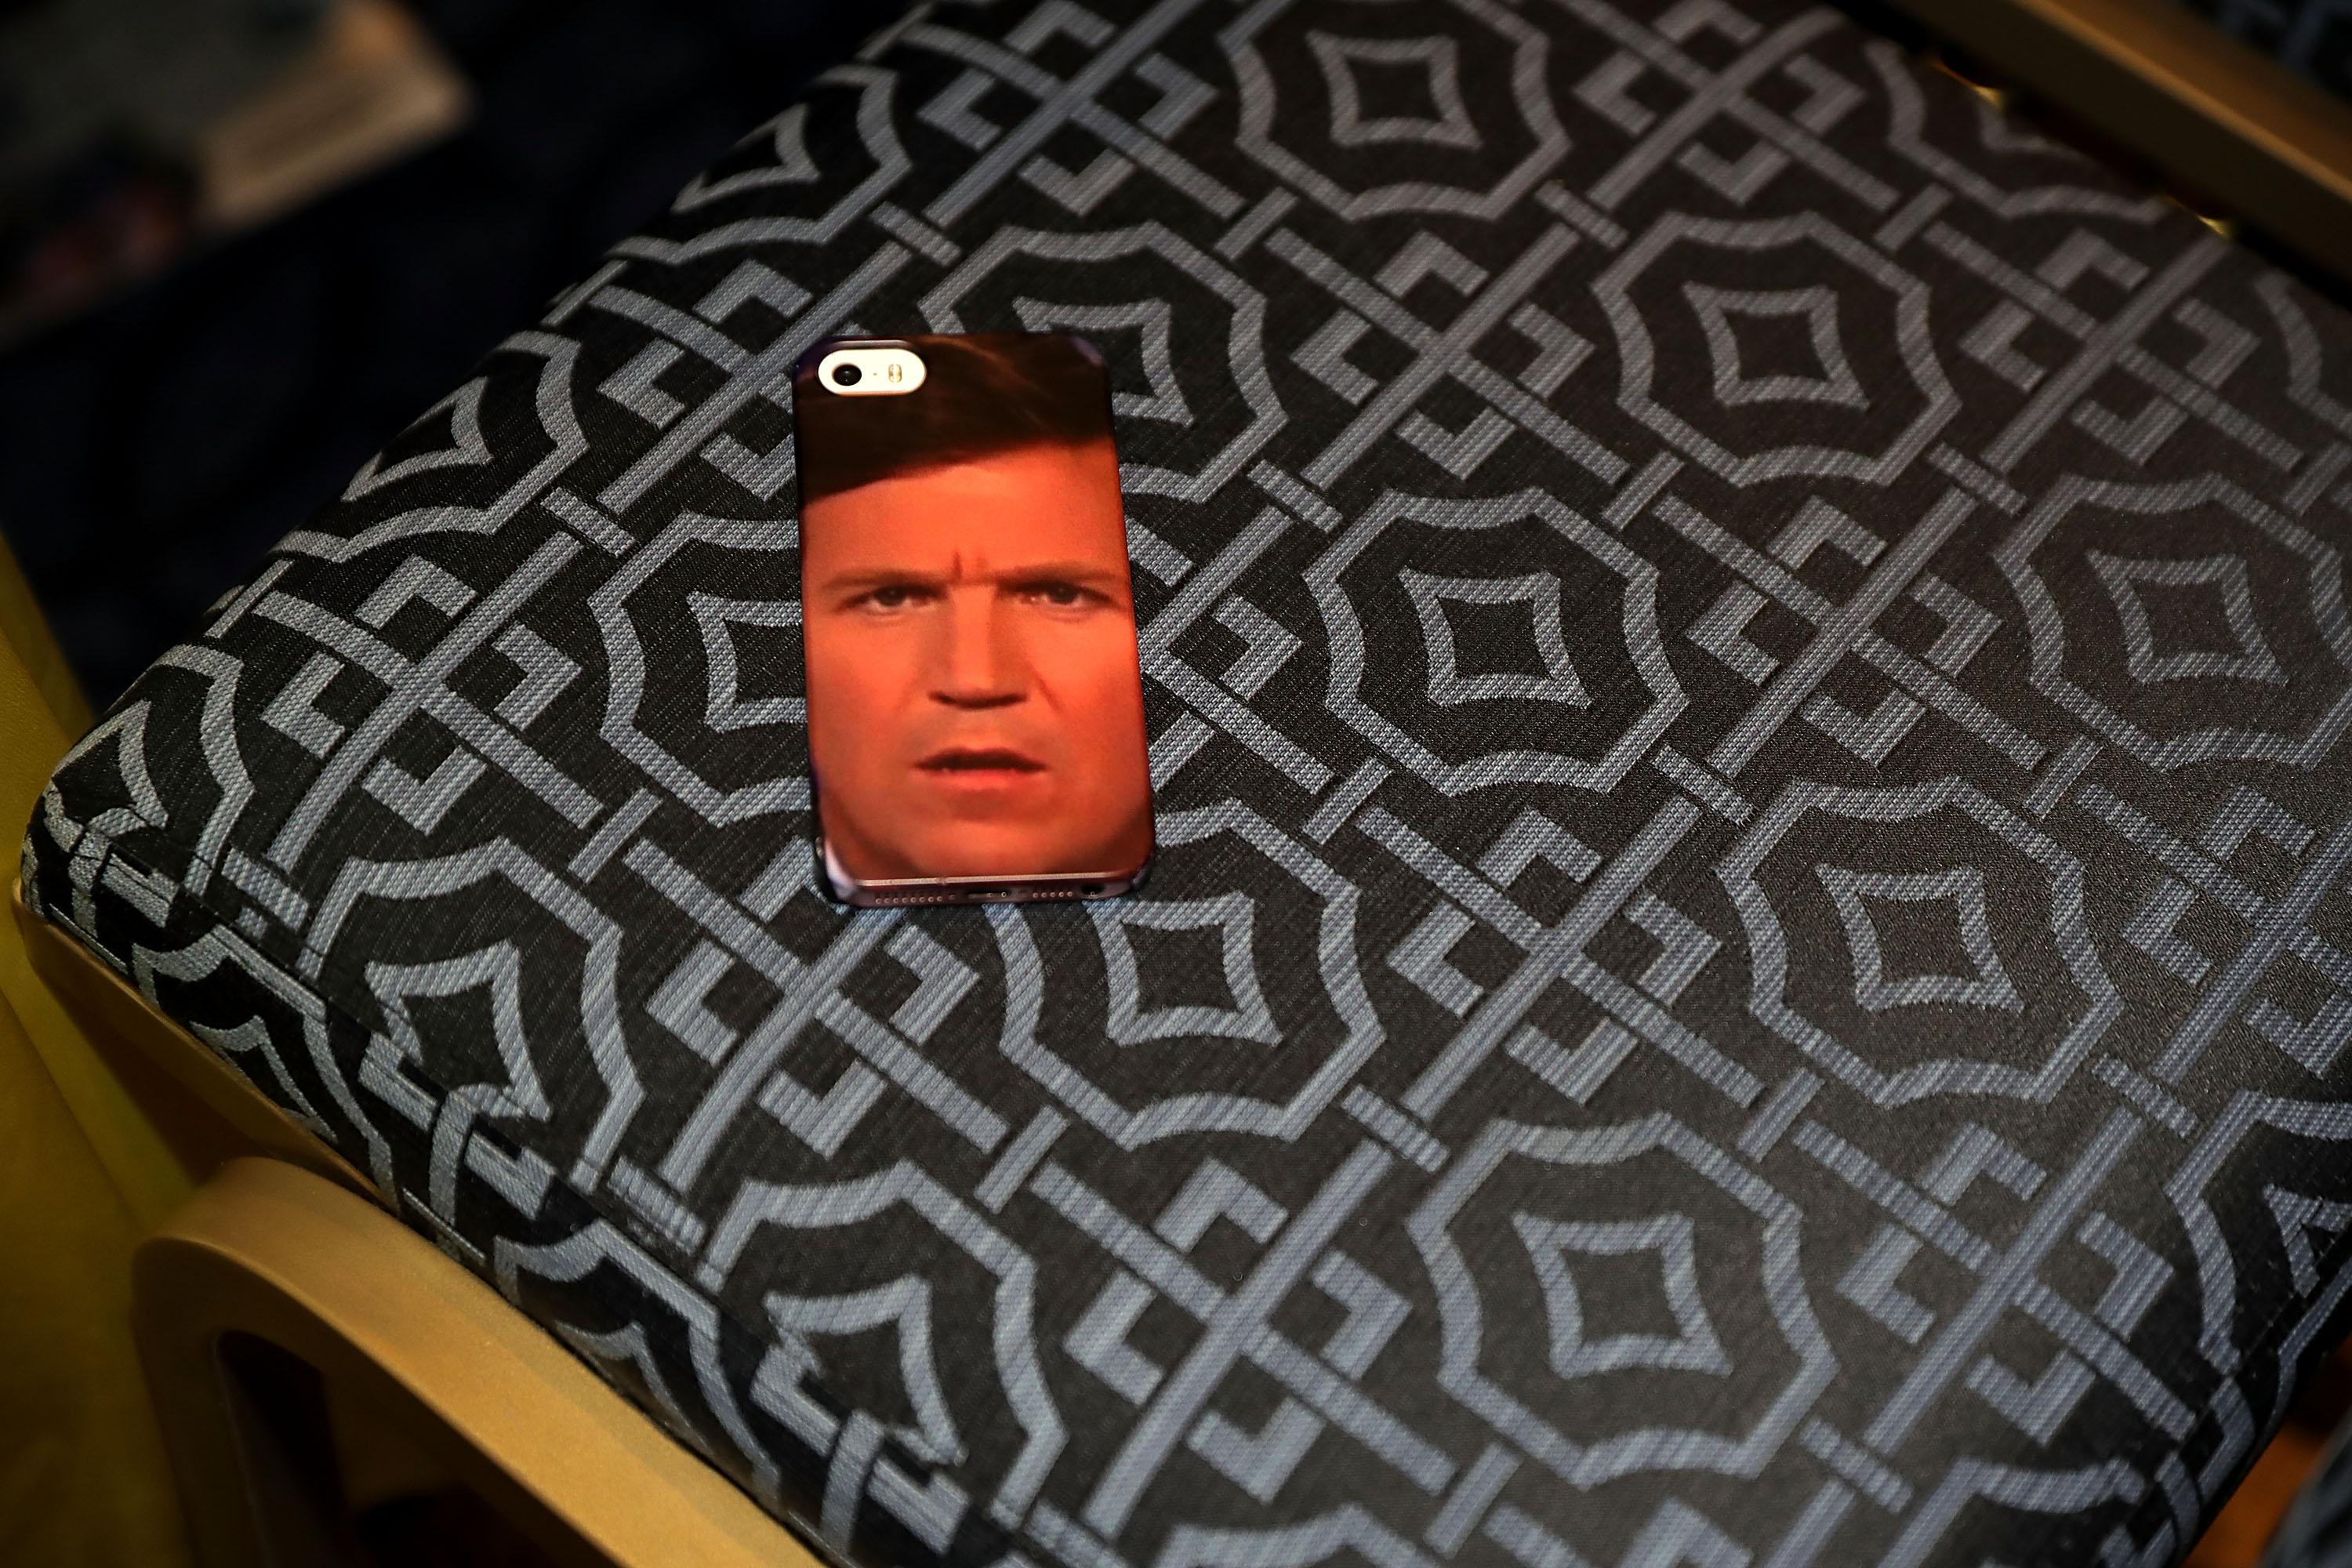 An iPhone case with Tucker Carlson's face is left in a chair.